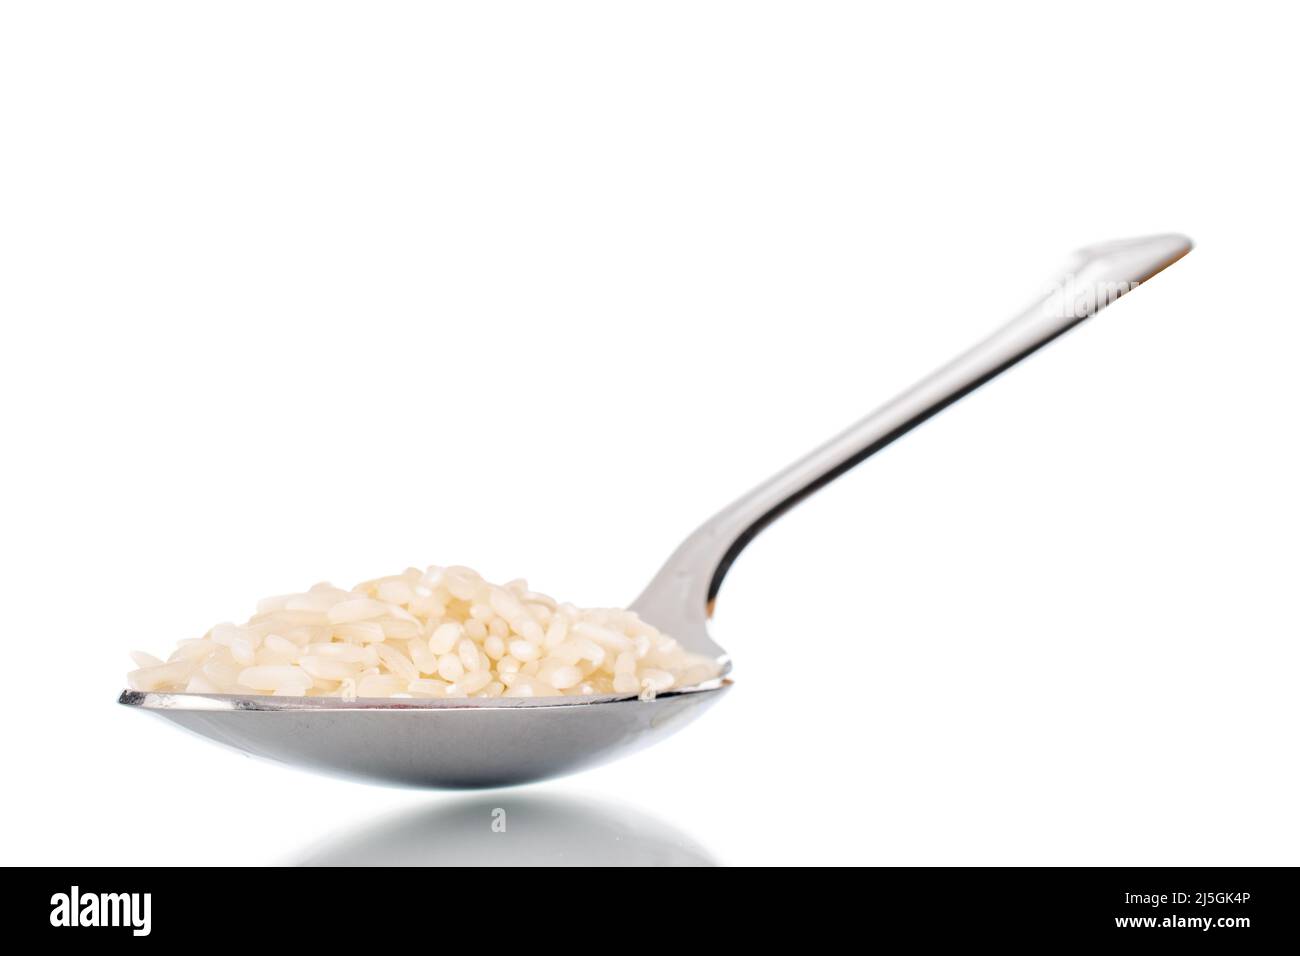 Uncooked organic rice with a metal spoon, close-up, isolated on a white background. Stock Photo